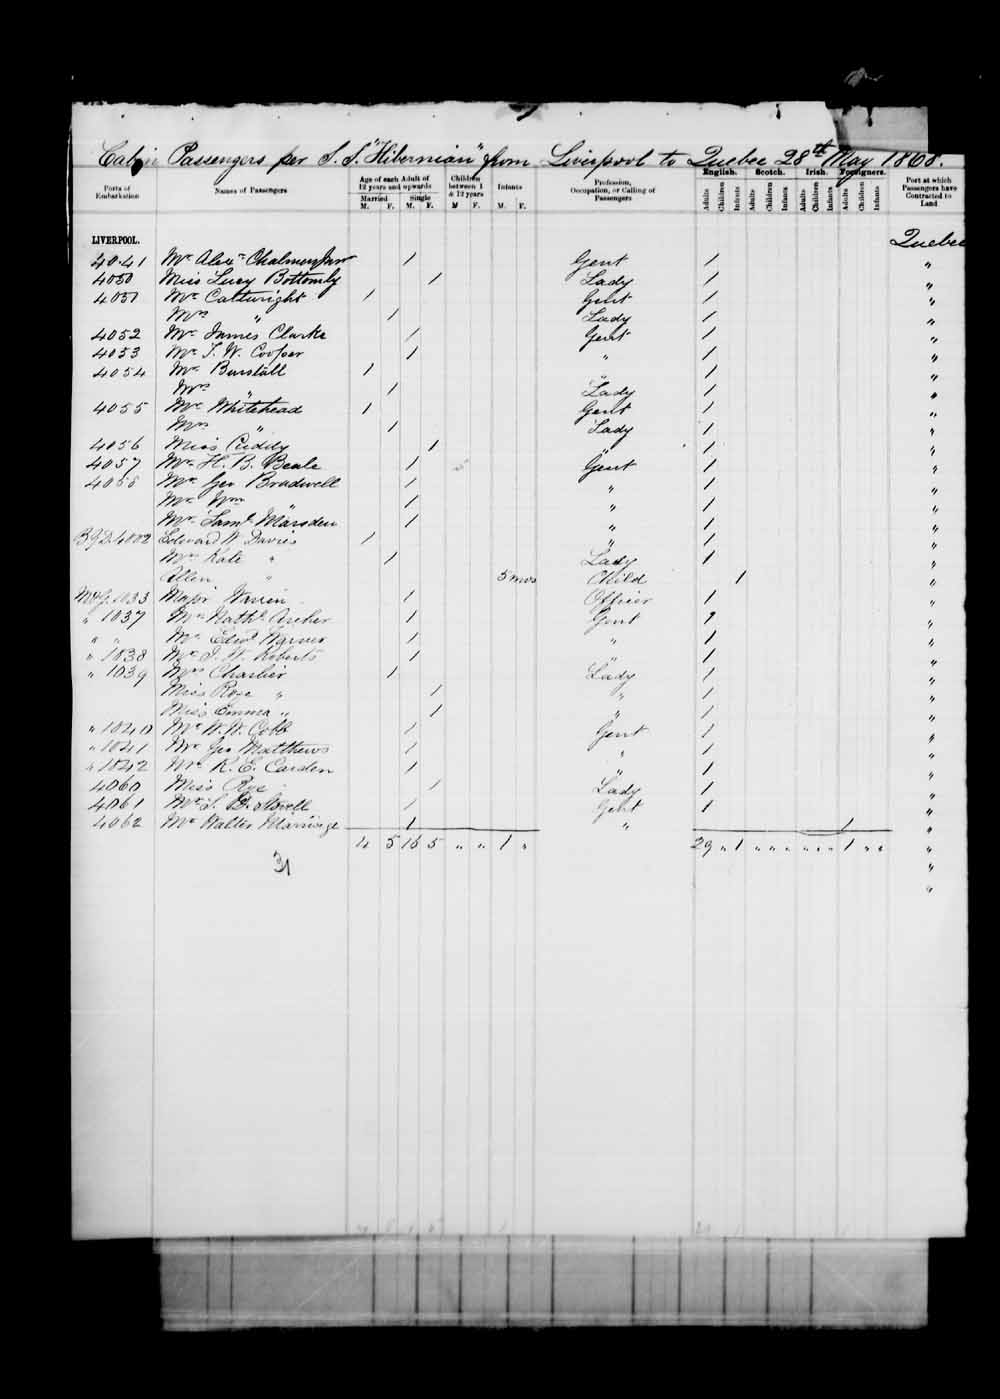 Digitized page of Passenger Lists for Image No.: e003530470